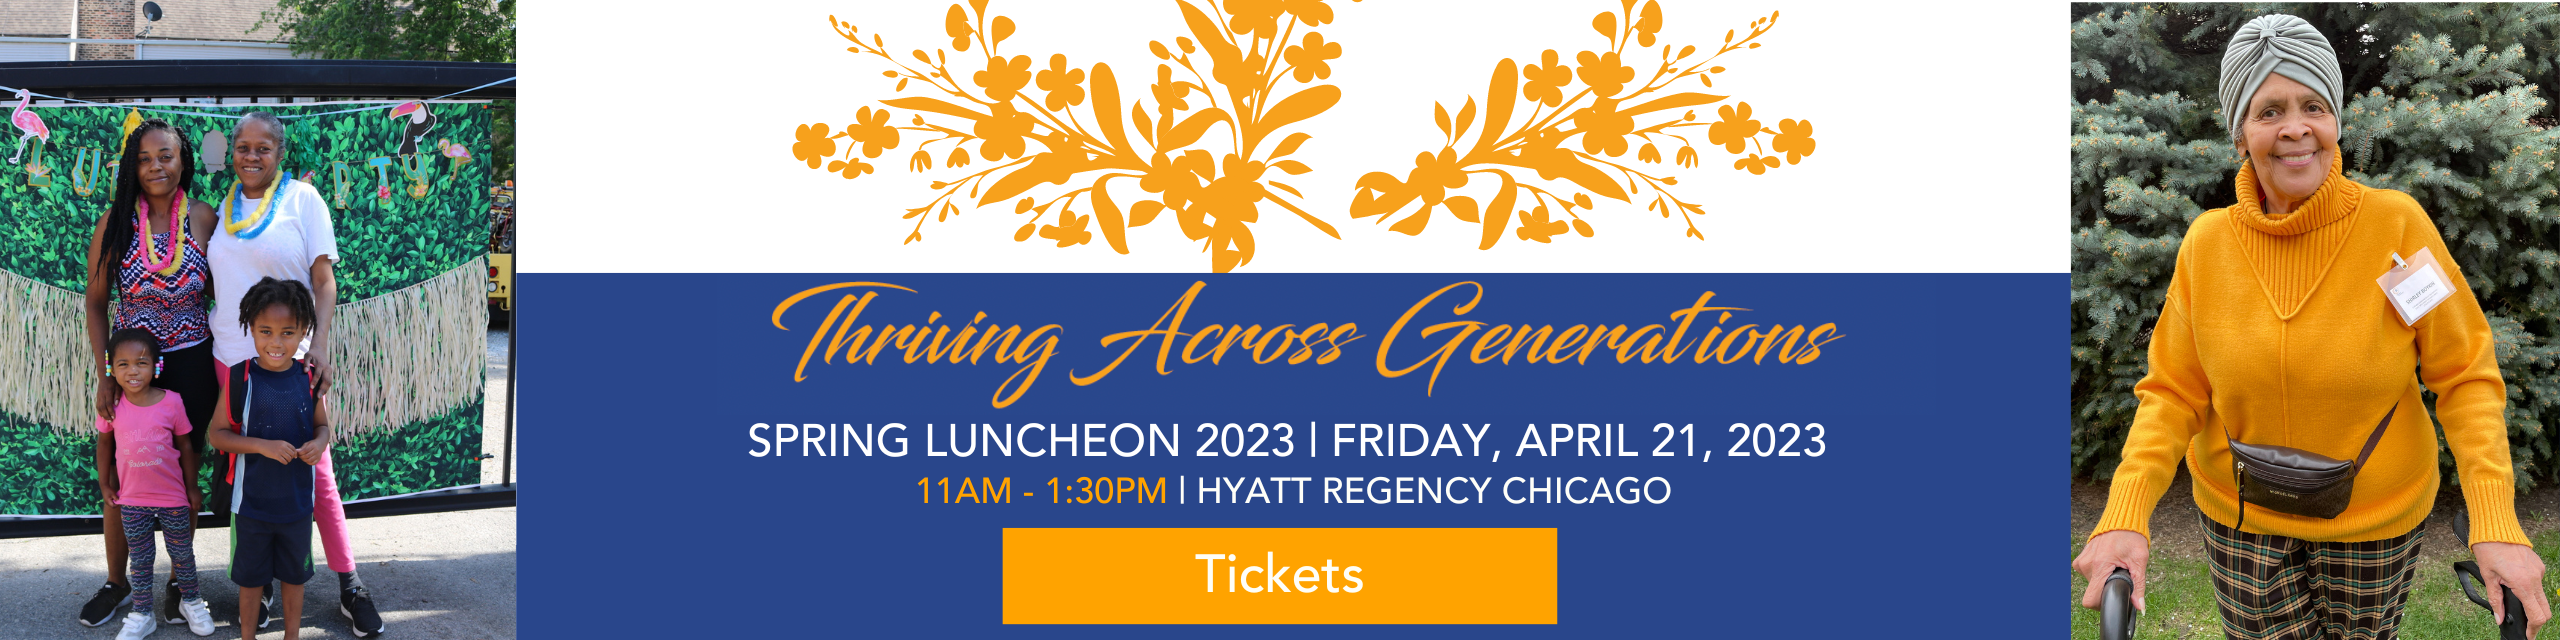 Chicago Commons Spring Luncheon 2023 Thriving Across Generations